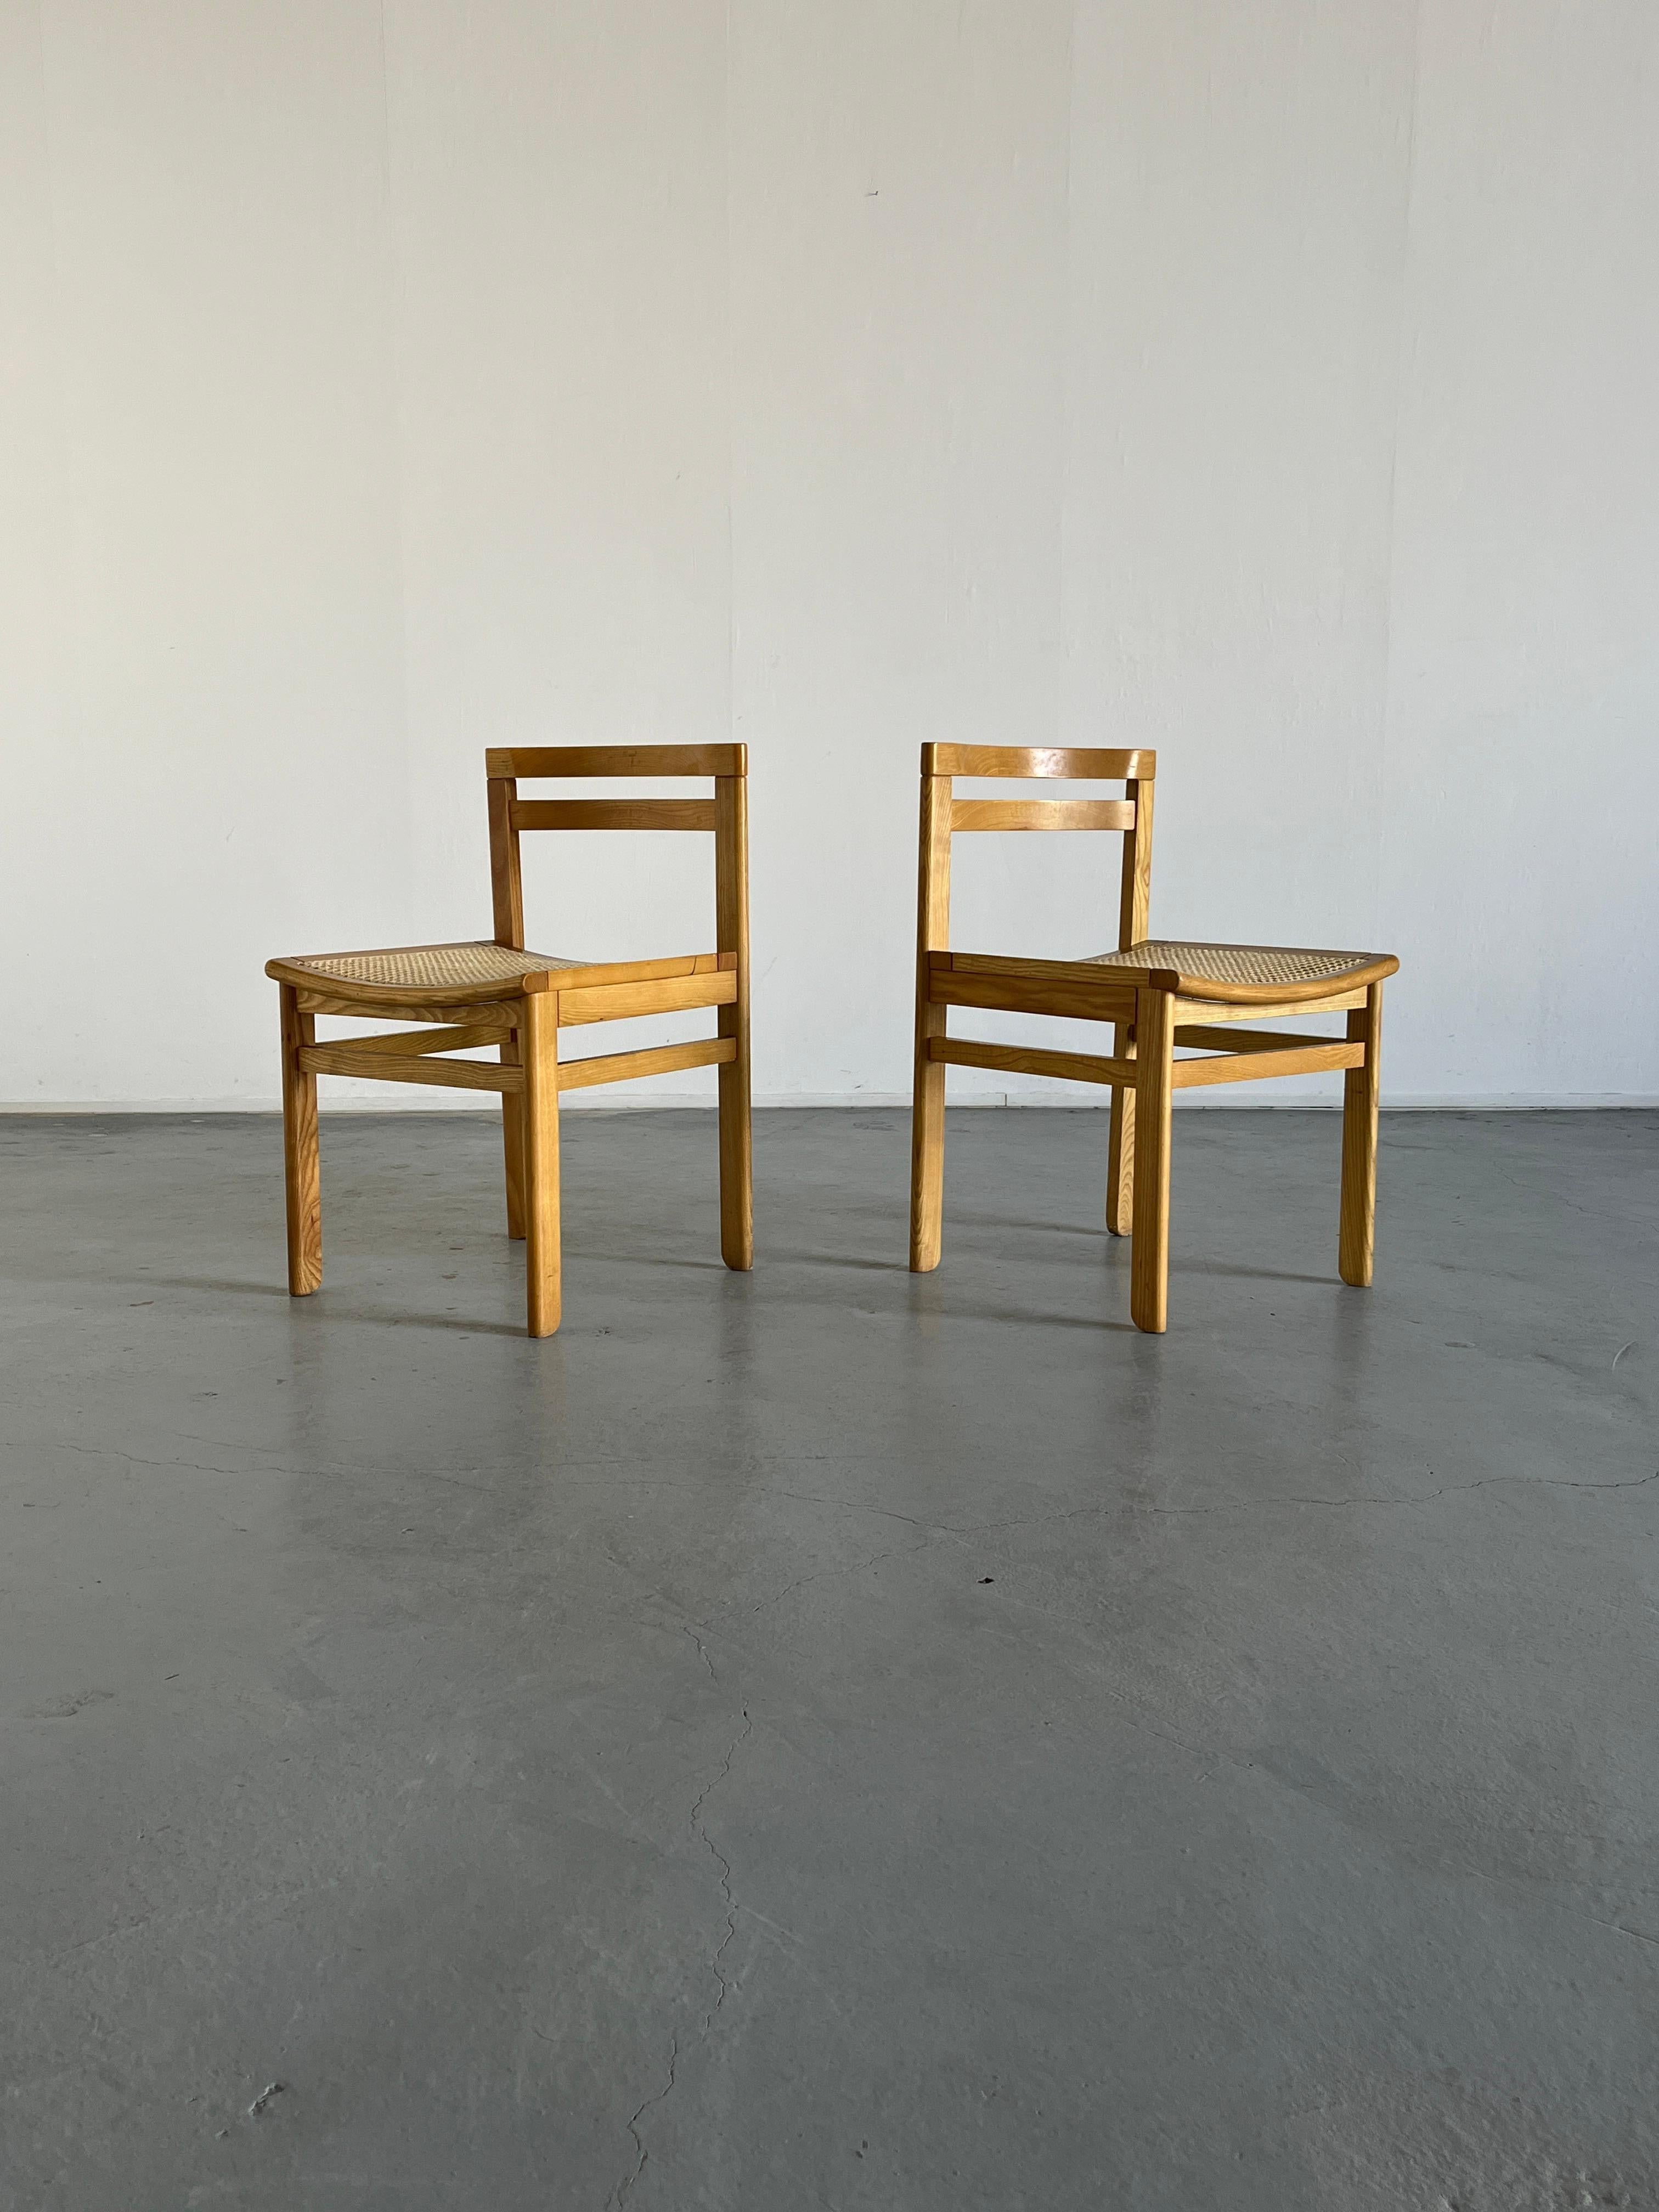 European Pair of Vintage Mid-Century Wooden Dining Chairs in Beech and Cane, 1960s For Sale